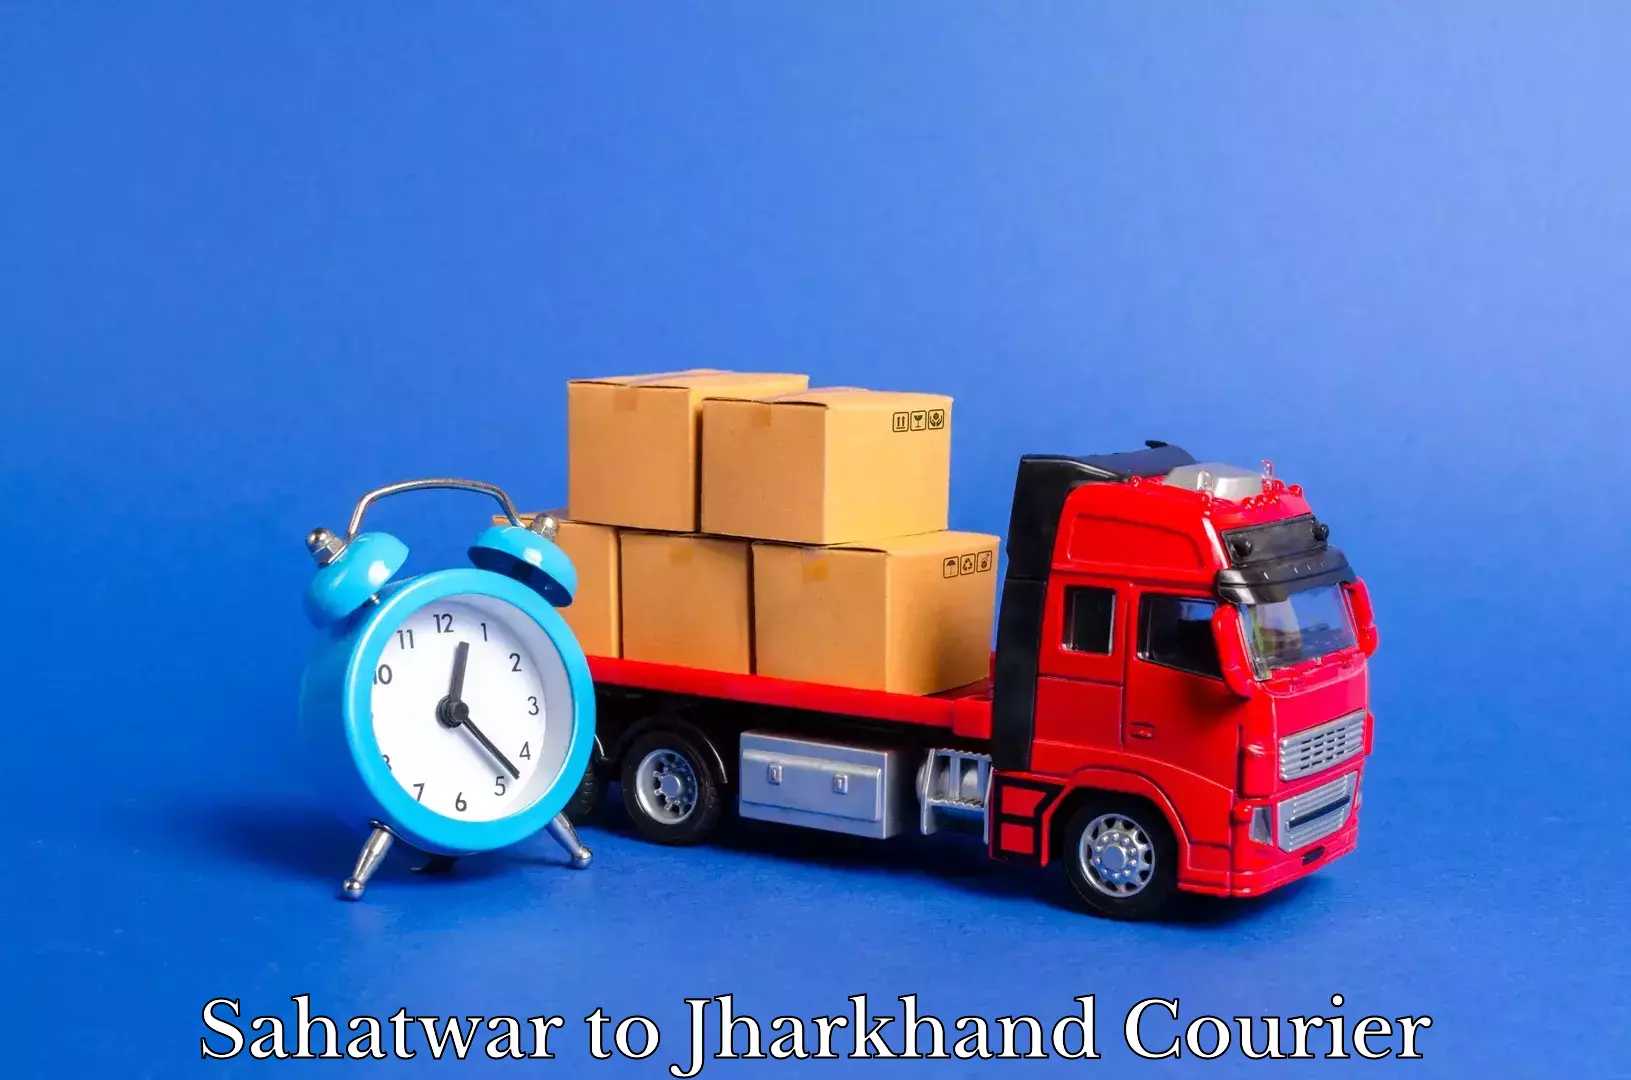 Quality relocation assistance Sahatwar to Jharkhand